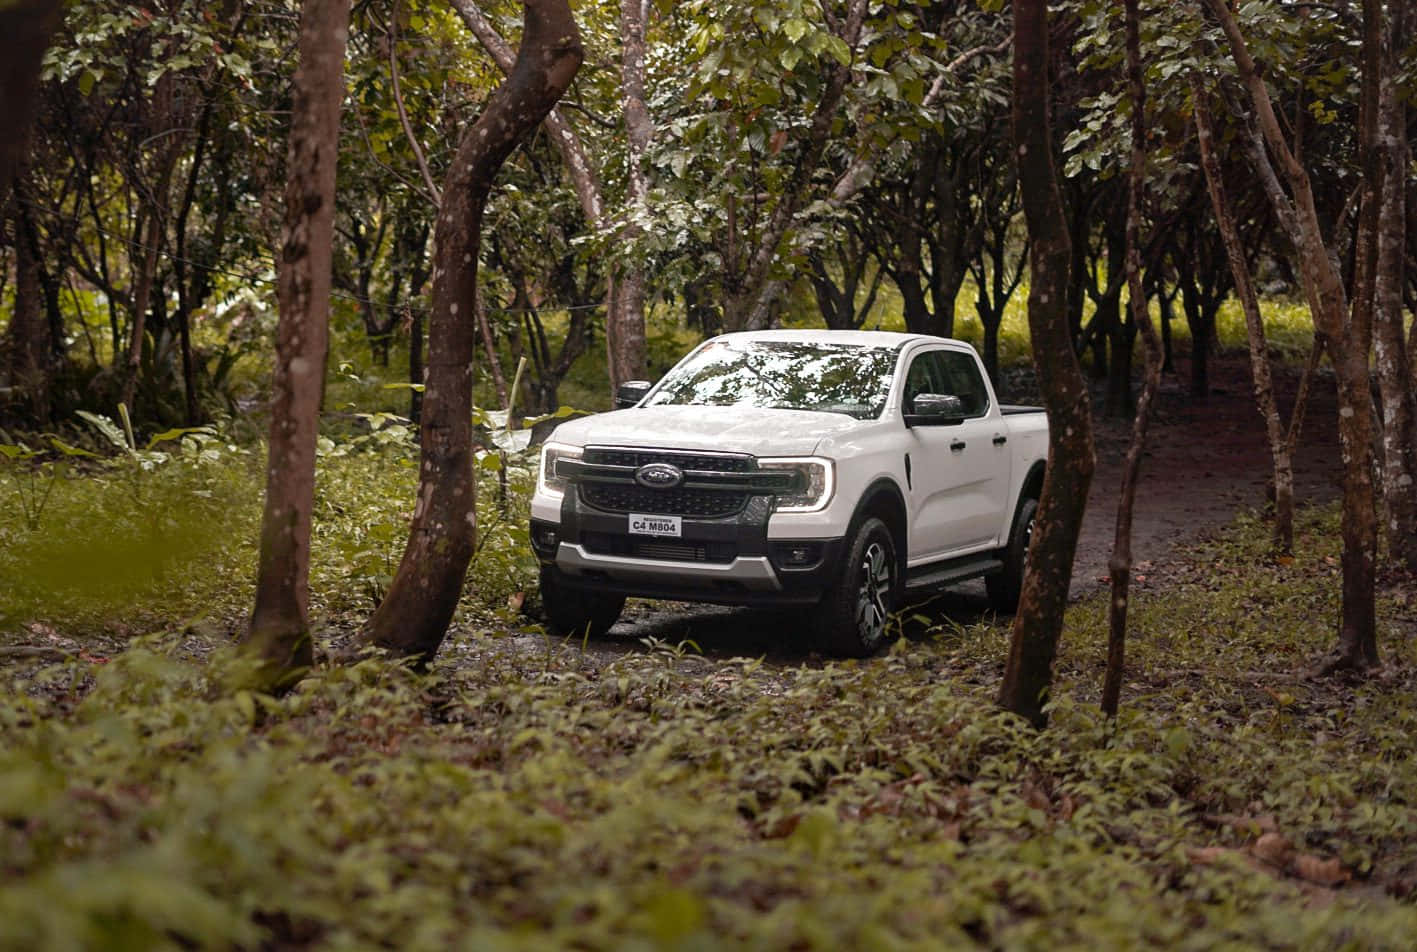 A White Truck Driving Through A Forest